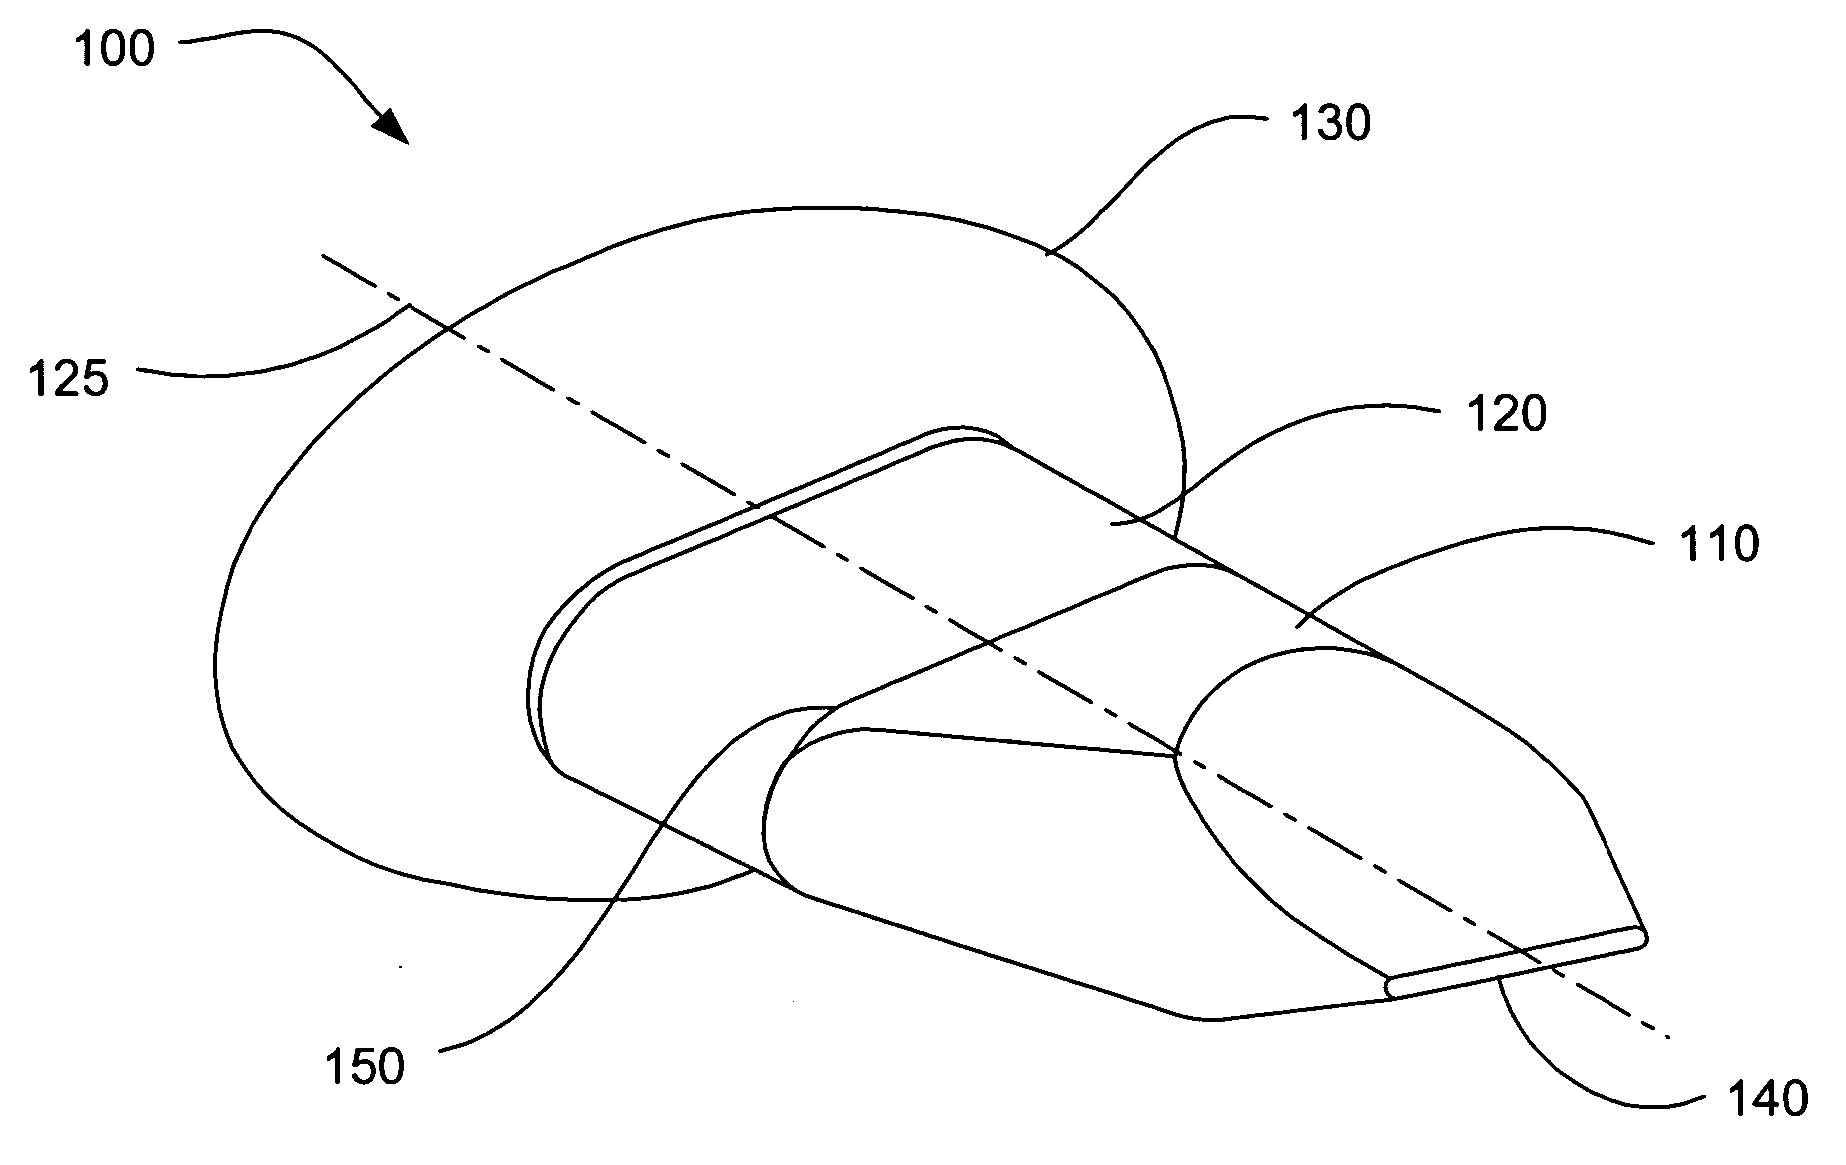 Distractible interspinous process implant and method of implantation